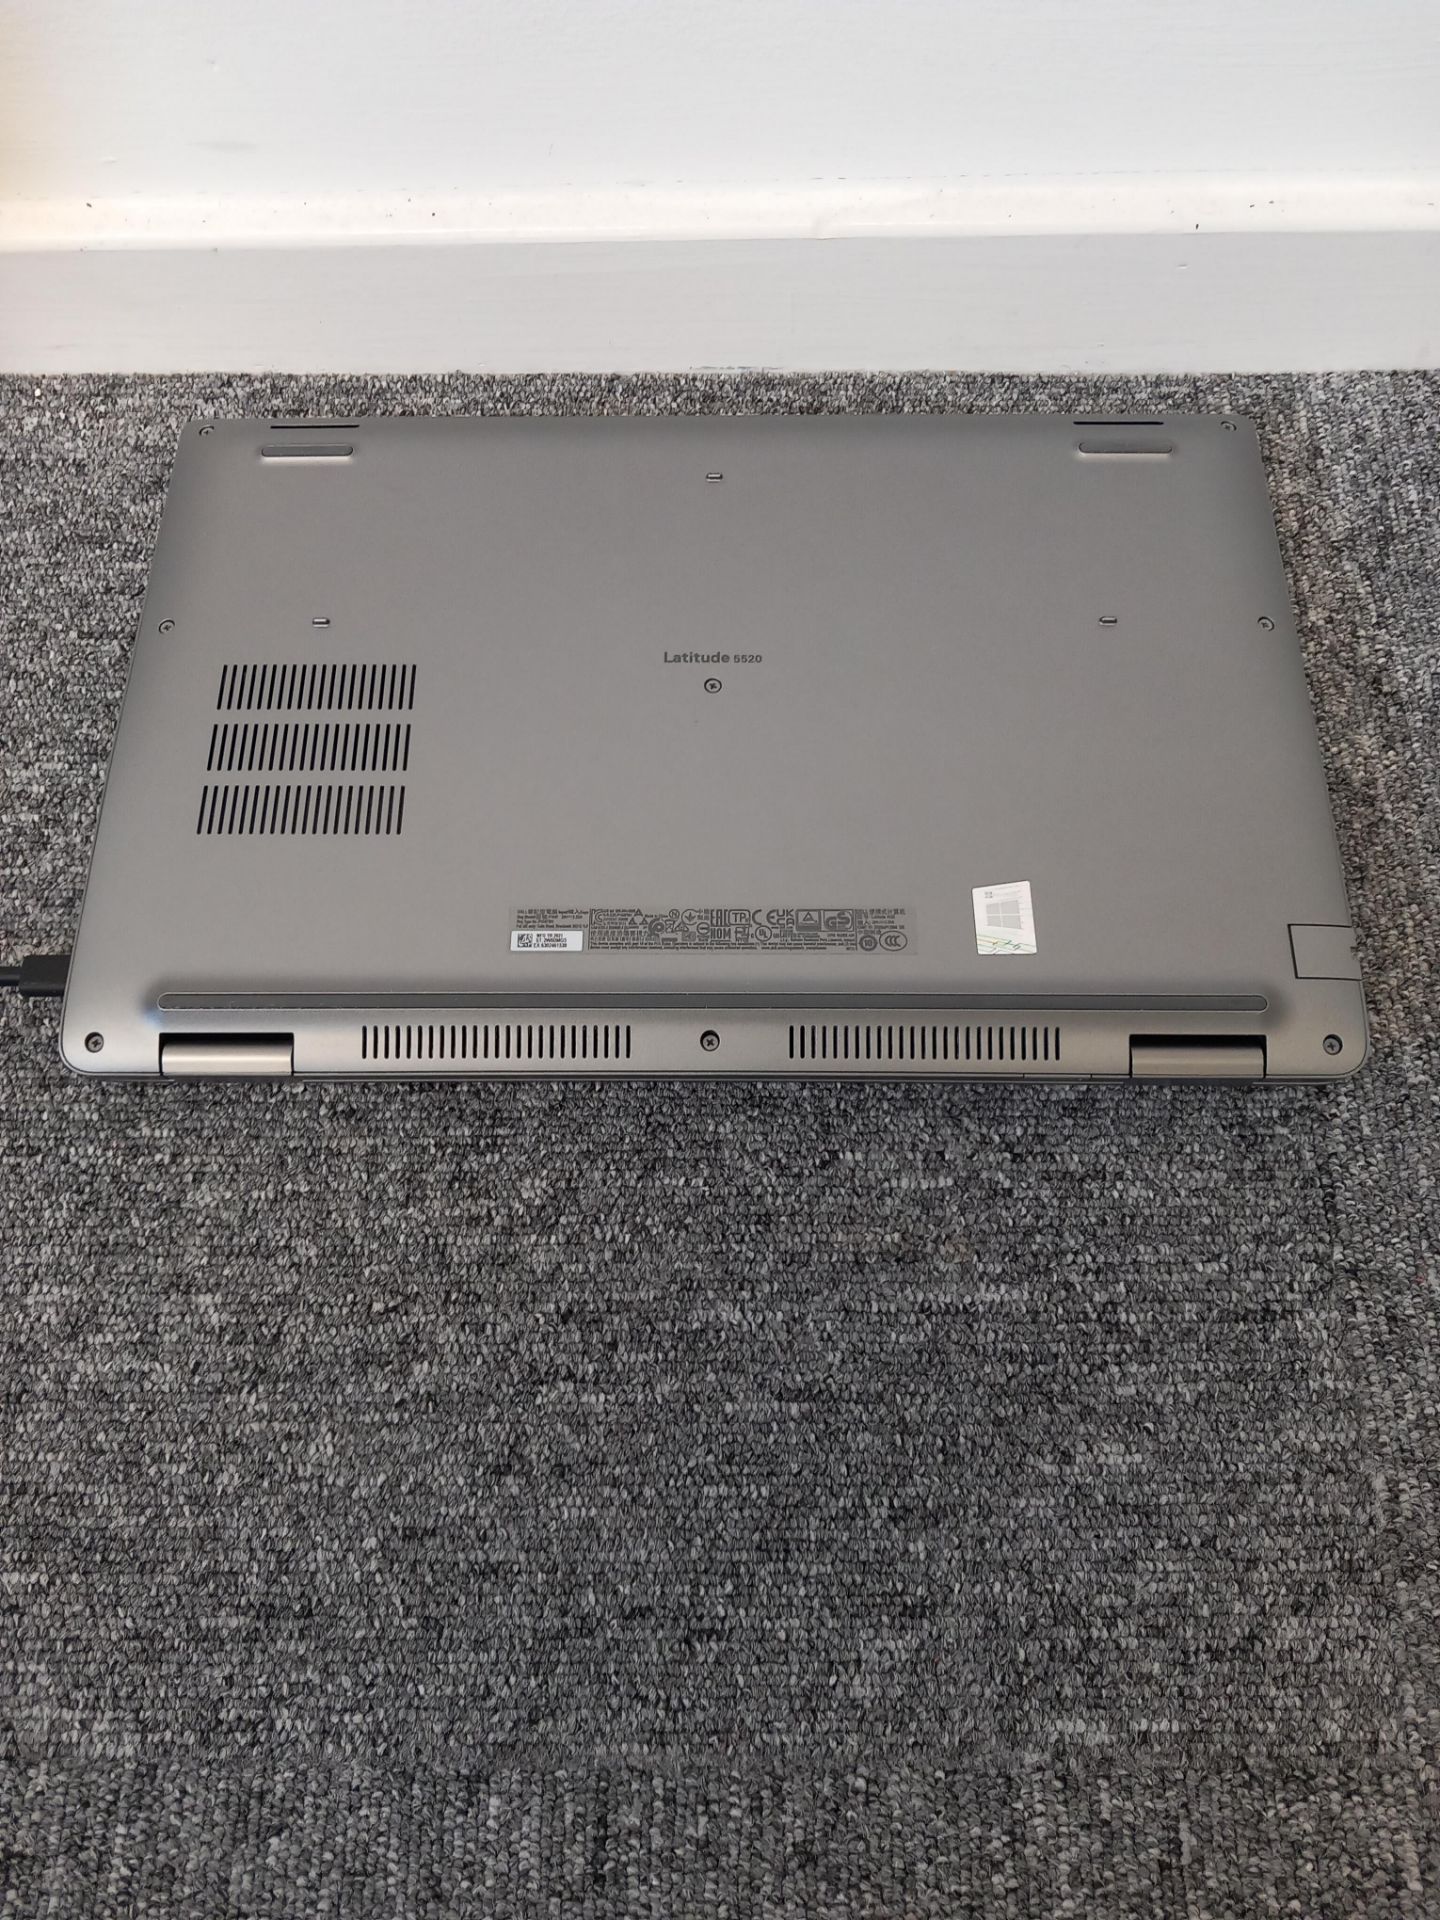 Dell Latitude 5520 Laptop with Charger (Located in Stockport) - Image 3 of 6